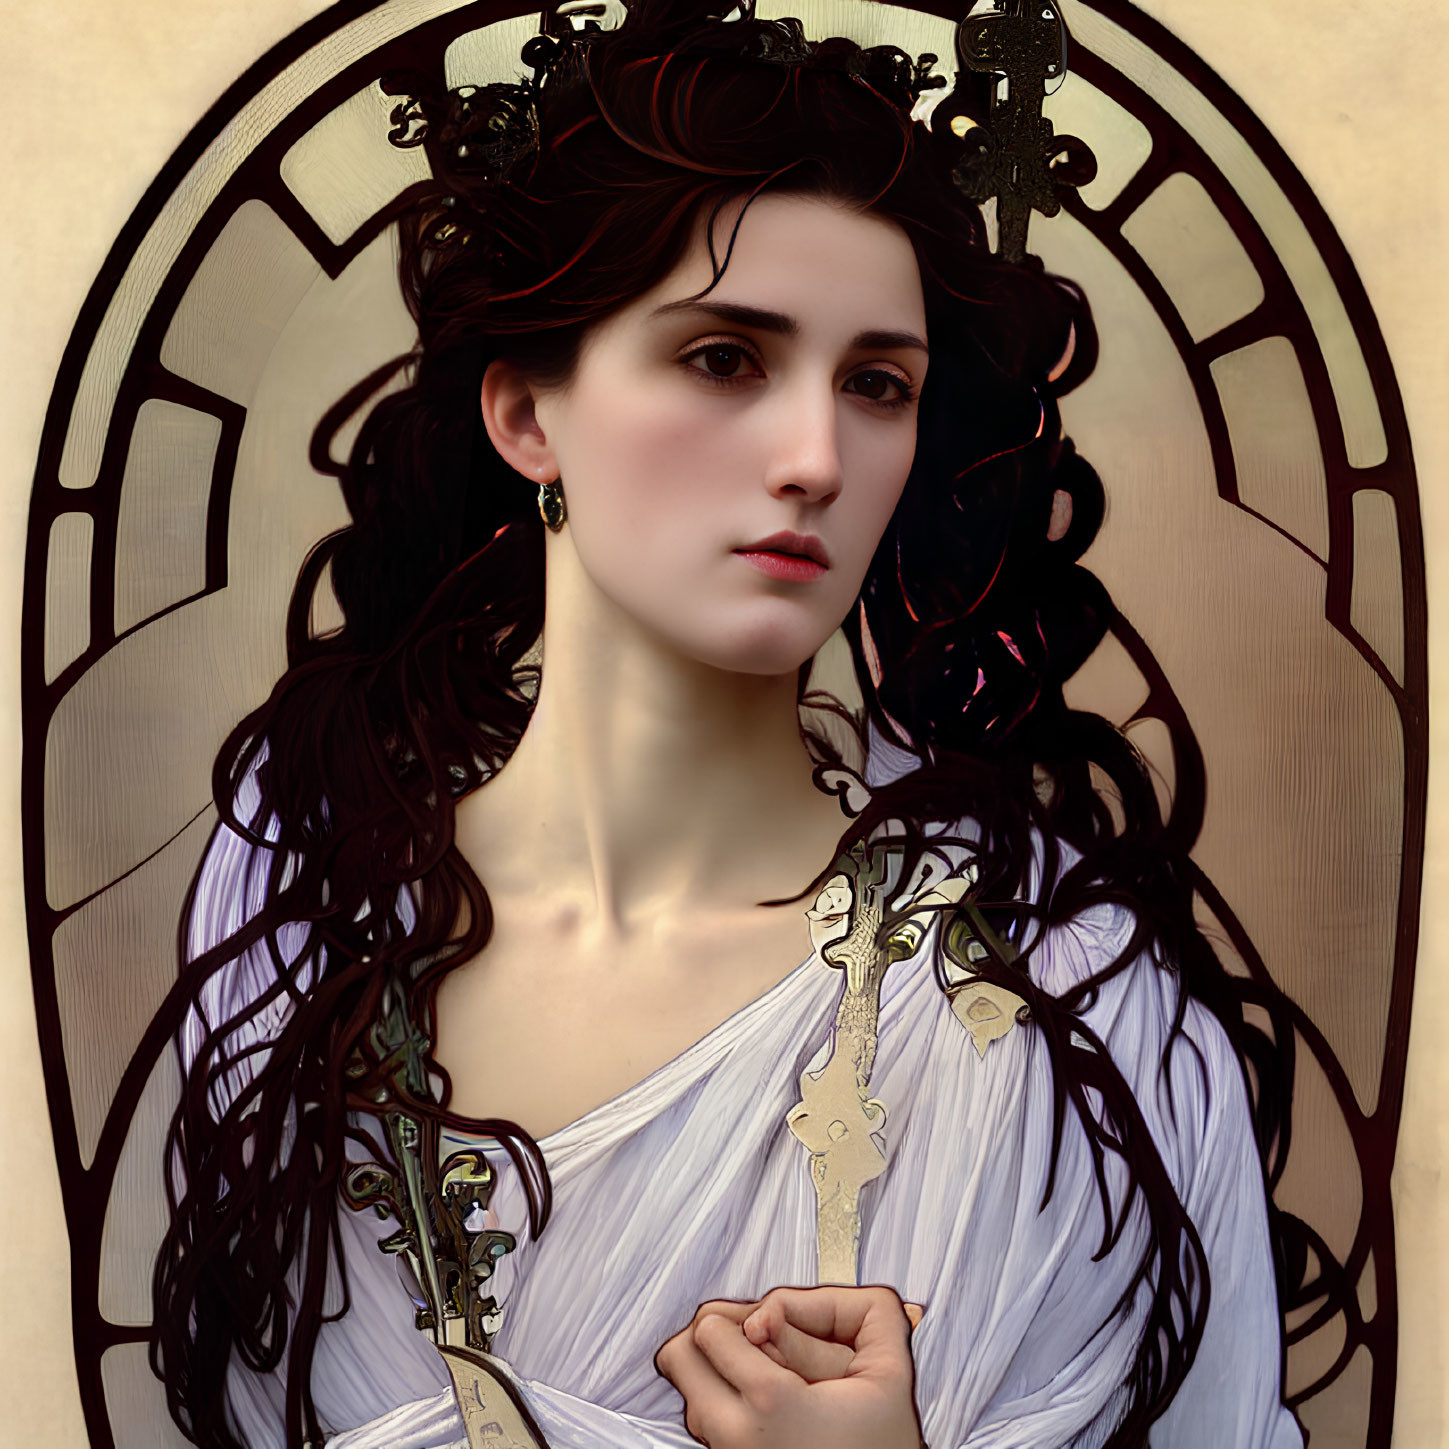 Dark-haired woman in Art Nouveau style with gold details